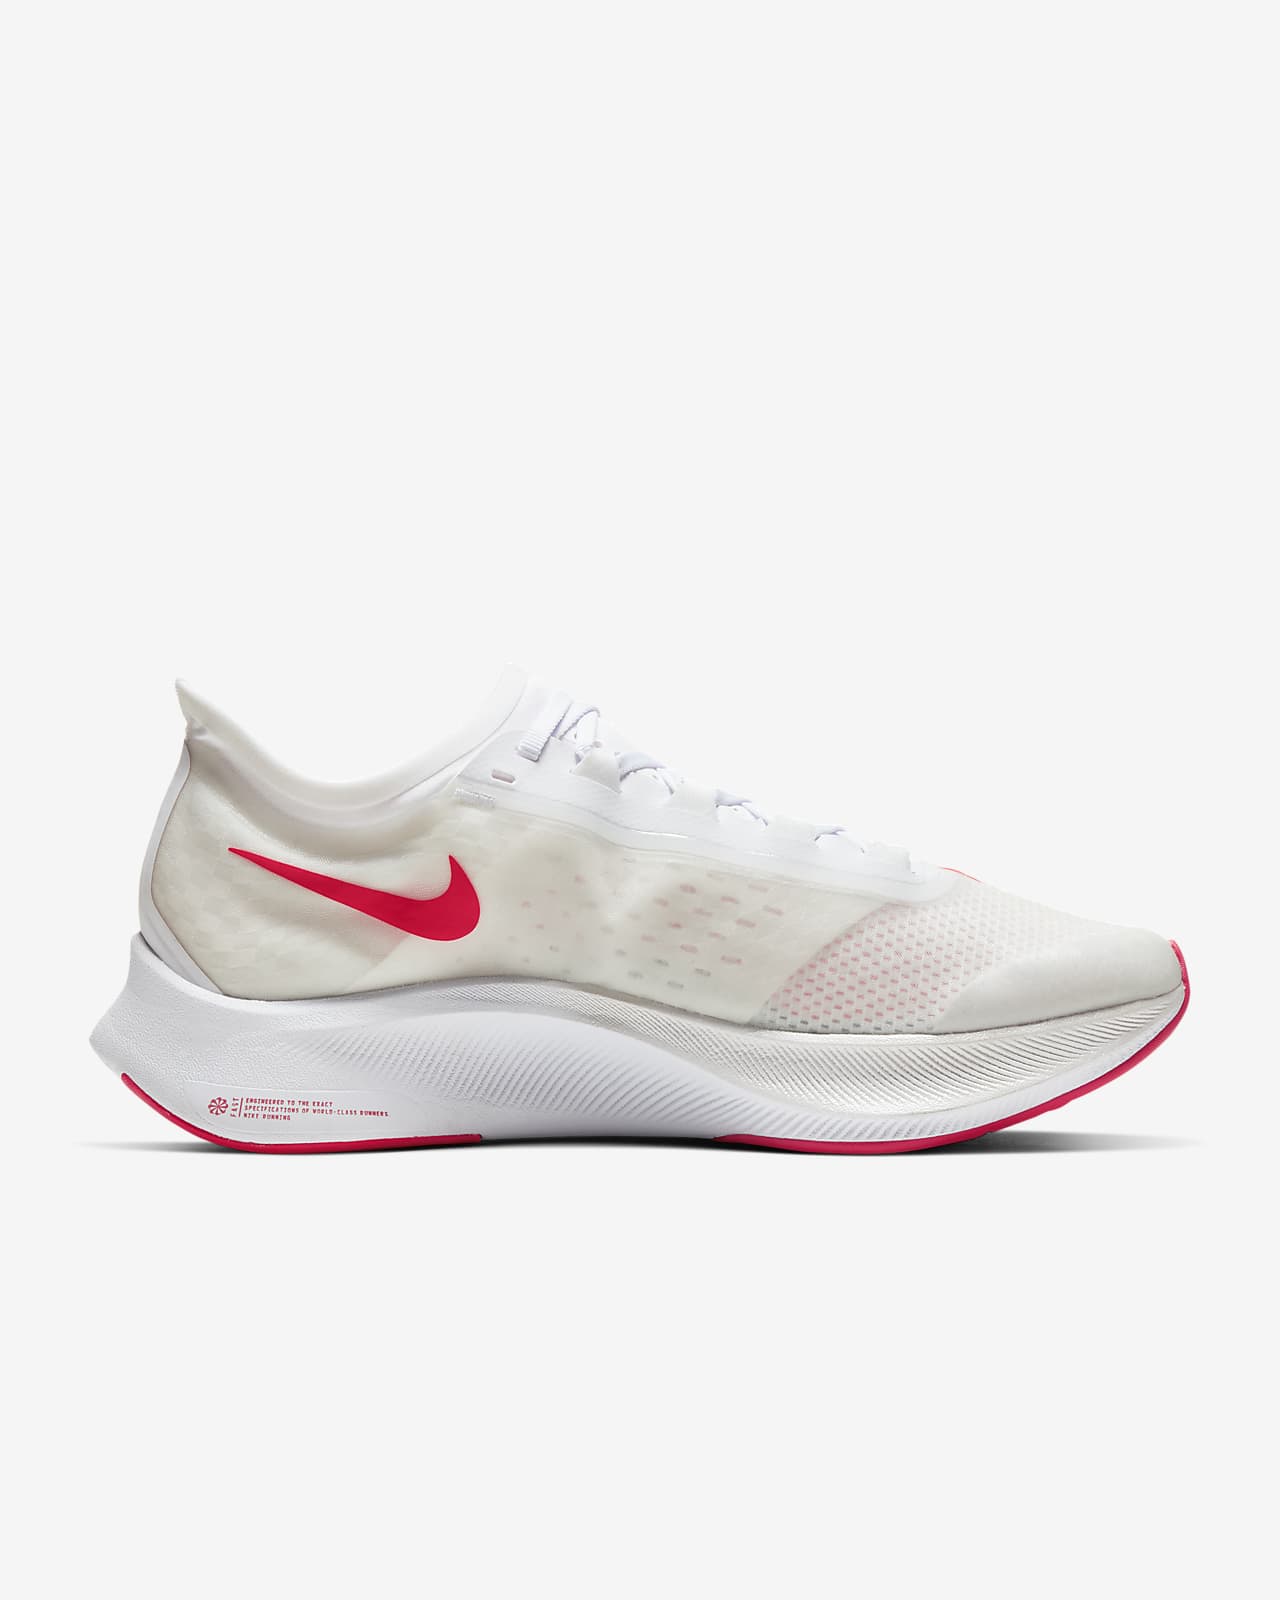 men's nike zoom fly 3 running shoes